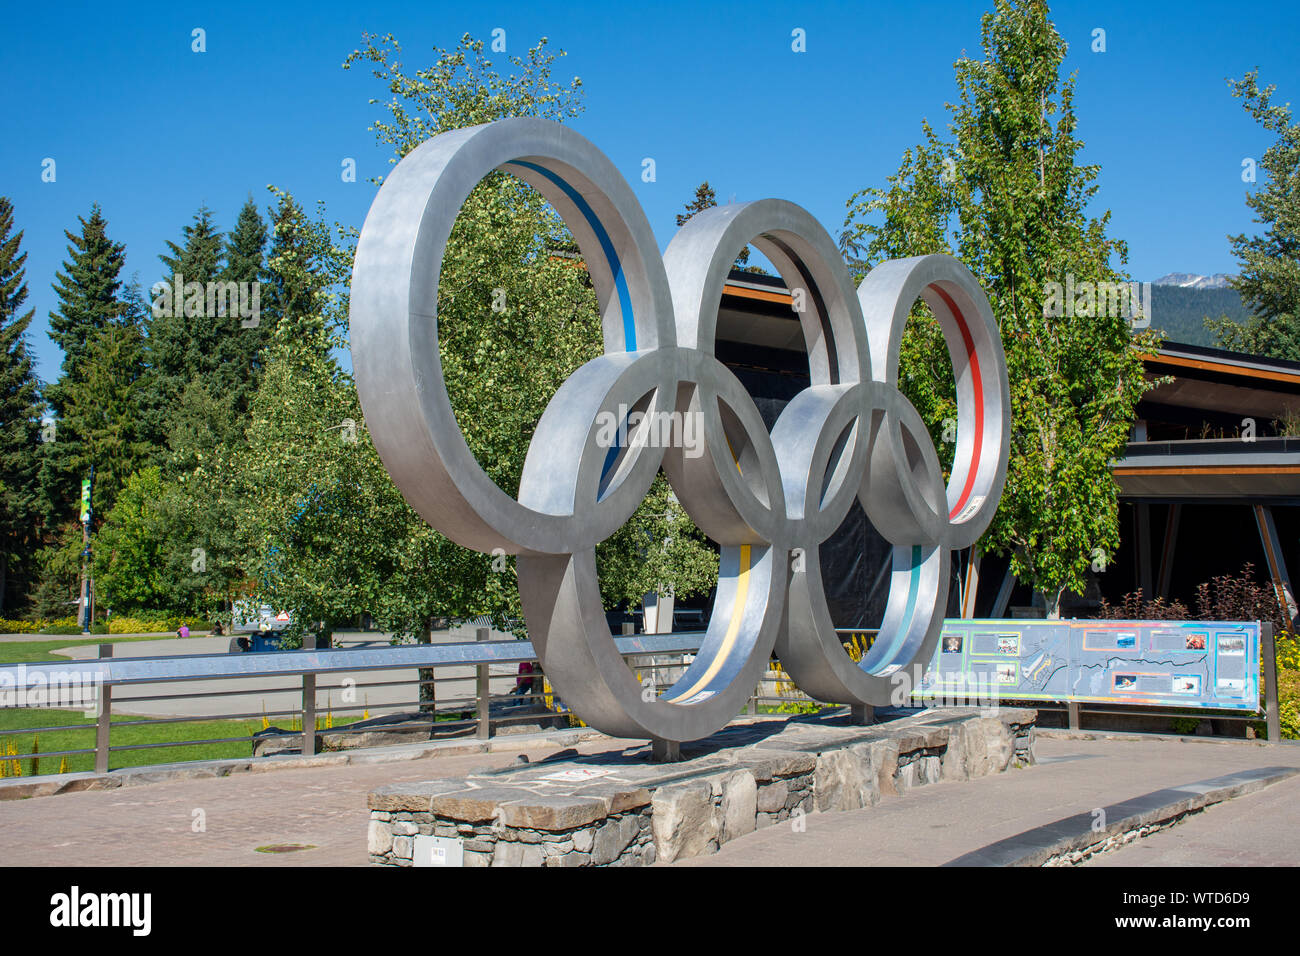 'Whistler, British Columbia/Canada - 08/07/2019: Whistler village Vancouver 2010 Olympics rings in the Olympic village in the summer blue sky.' Stock Photo